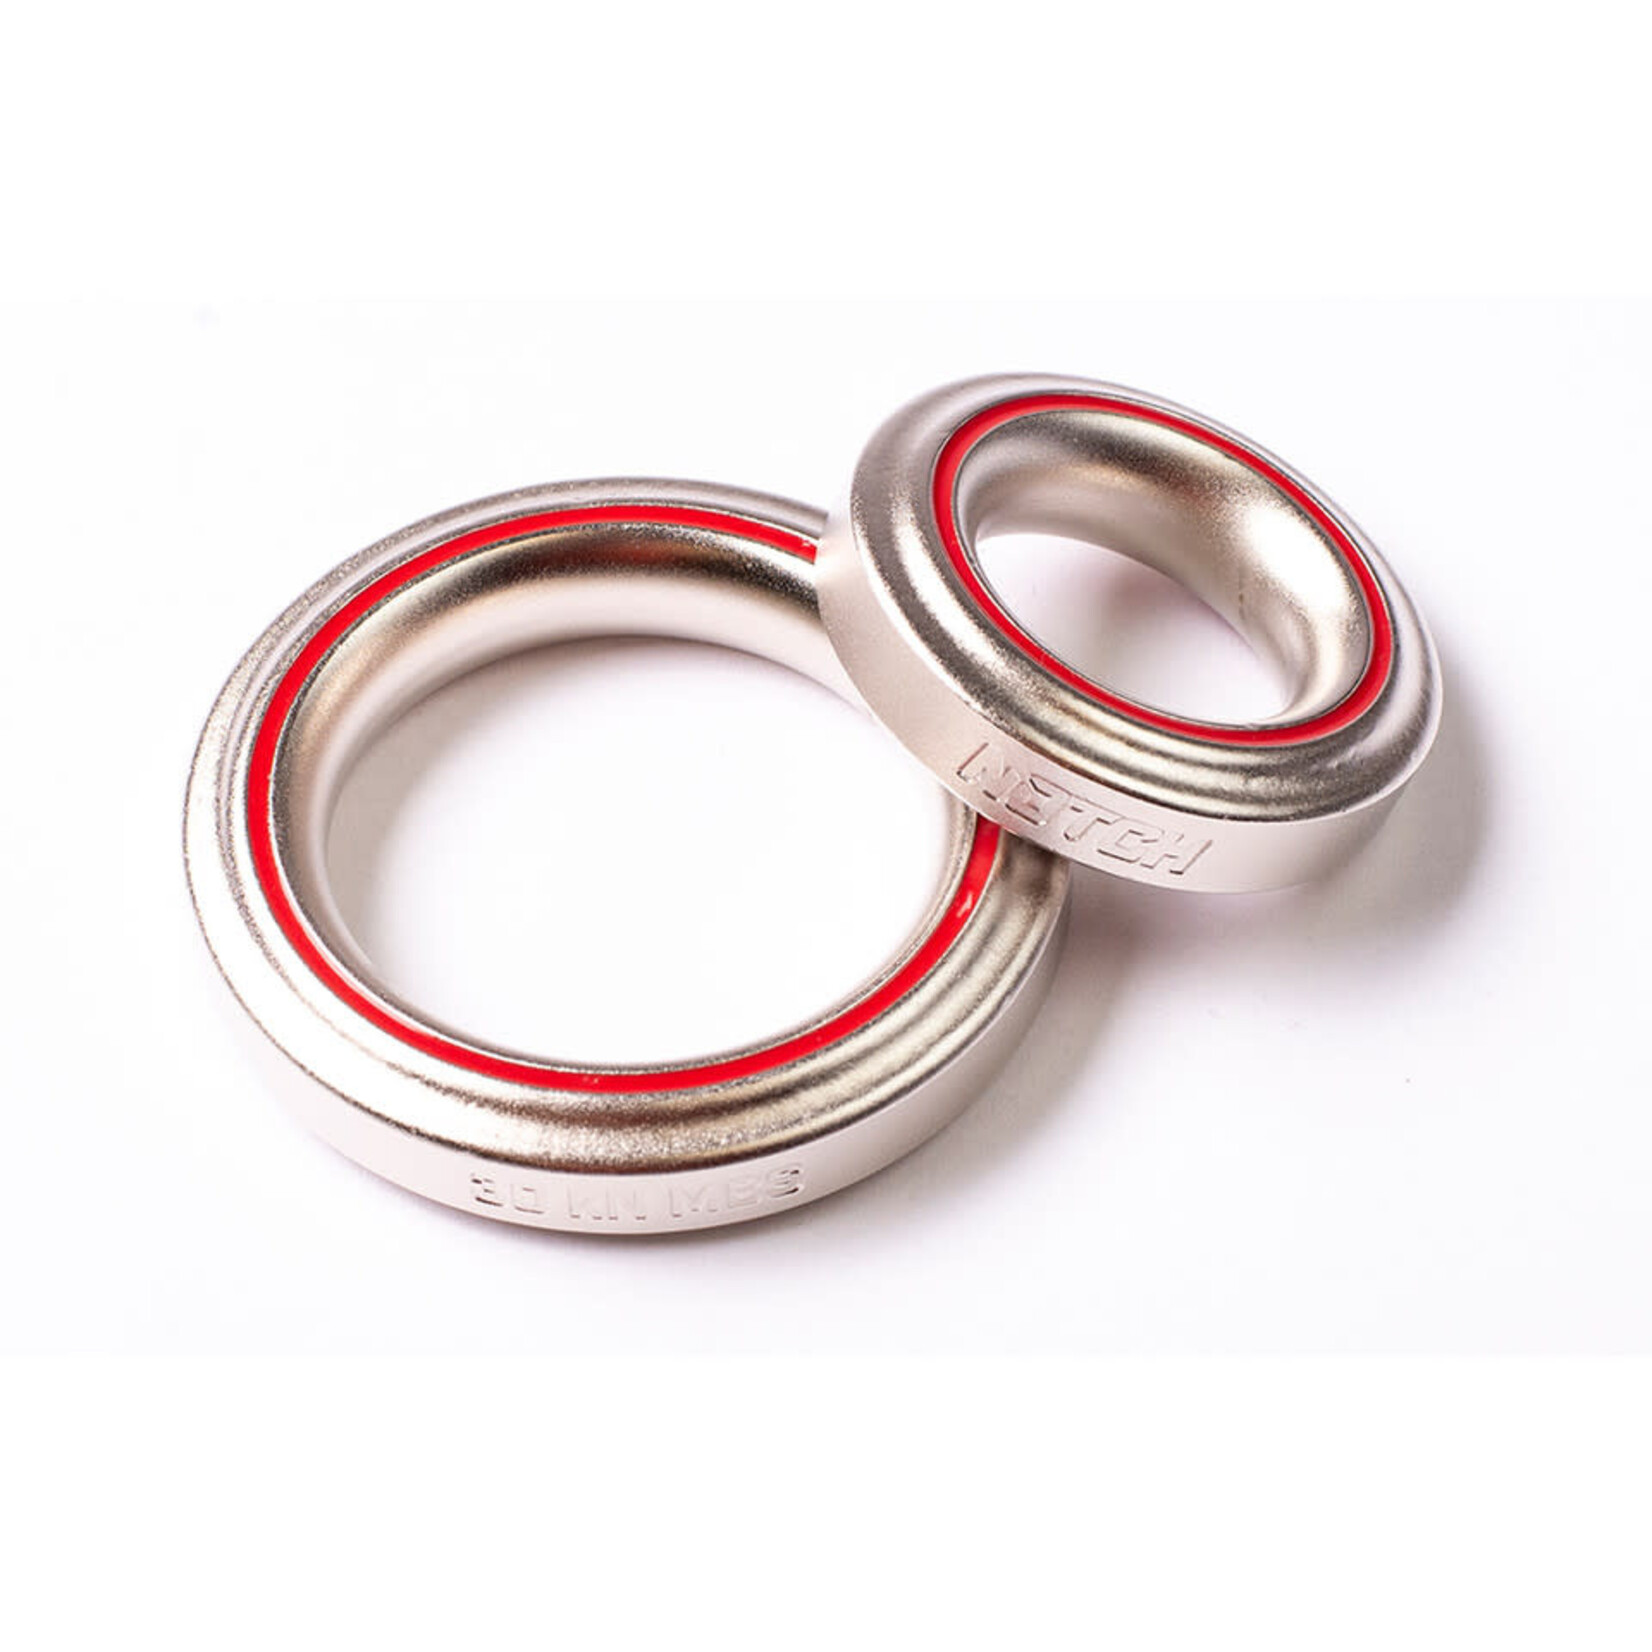 Notch Equipment Notch Wear Safe Steel Friction Ring (Large - 48x72mm)